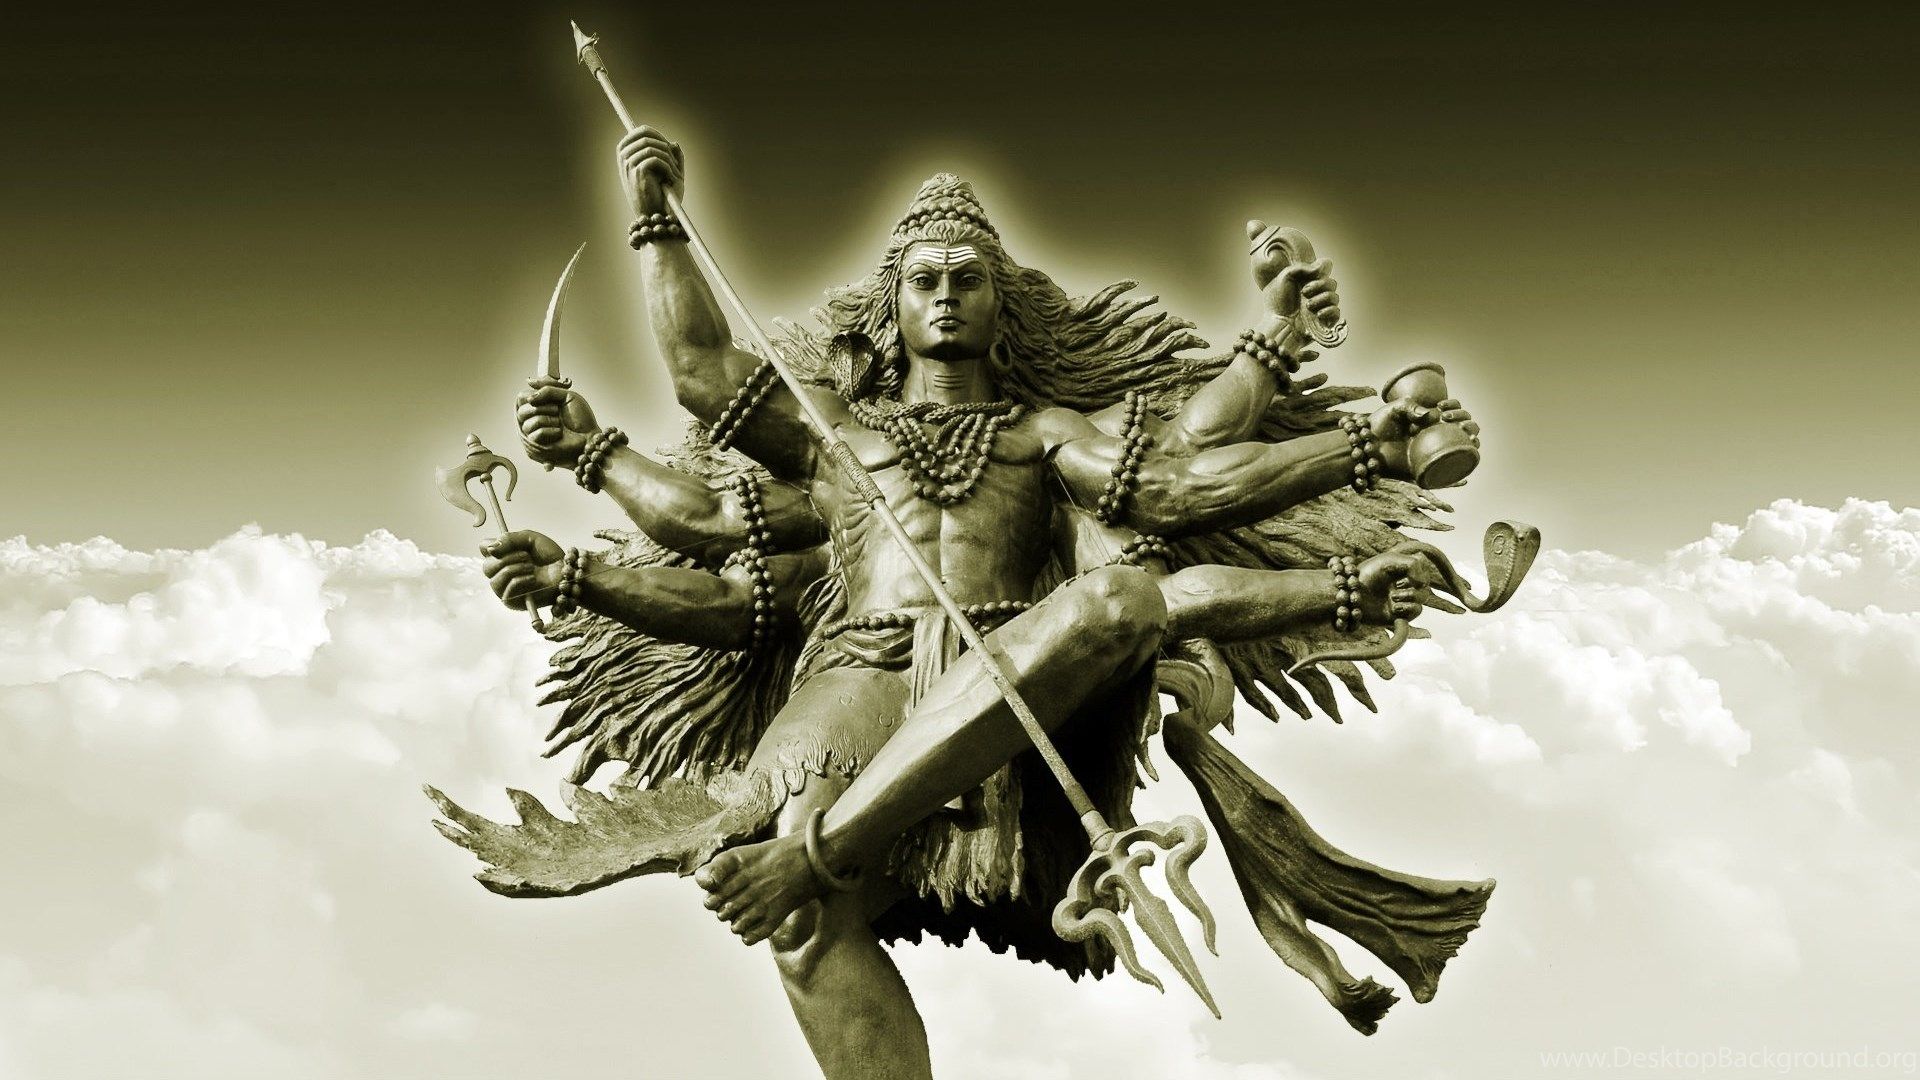 angry: 14+ Angry Lord Shiva 4K Wallpaper For Laptop Gif